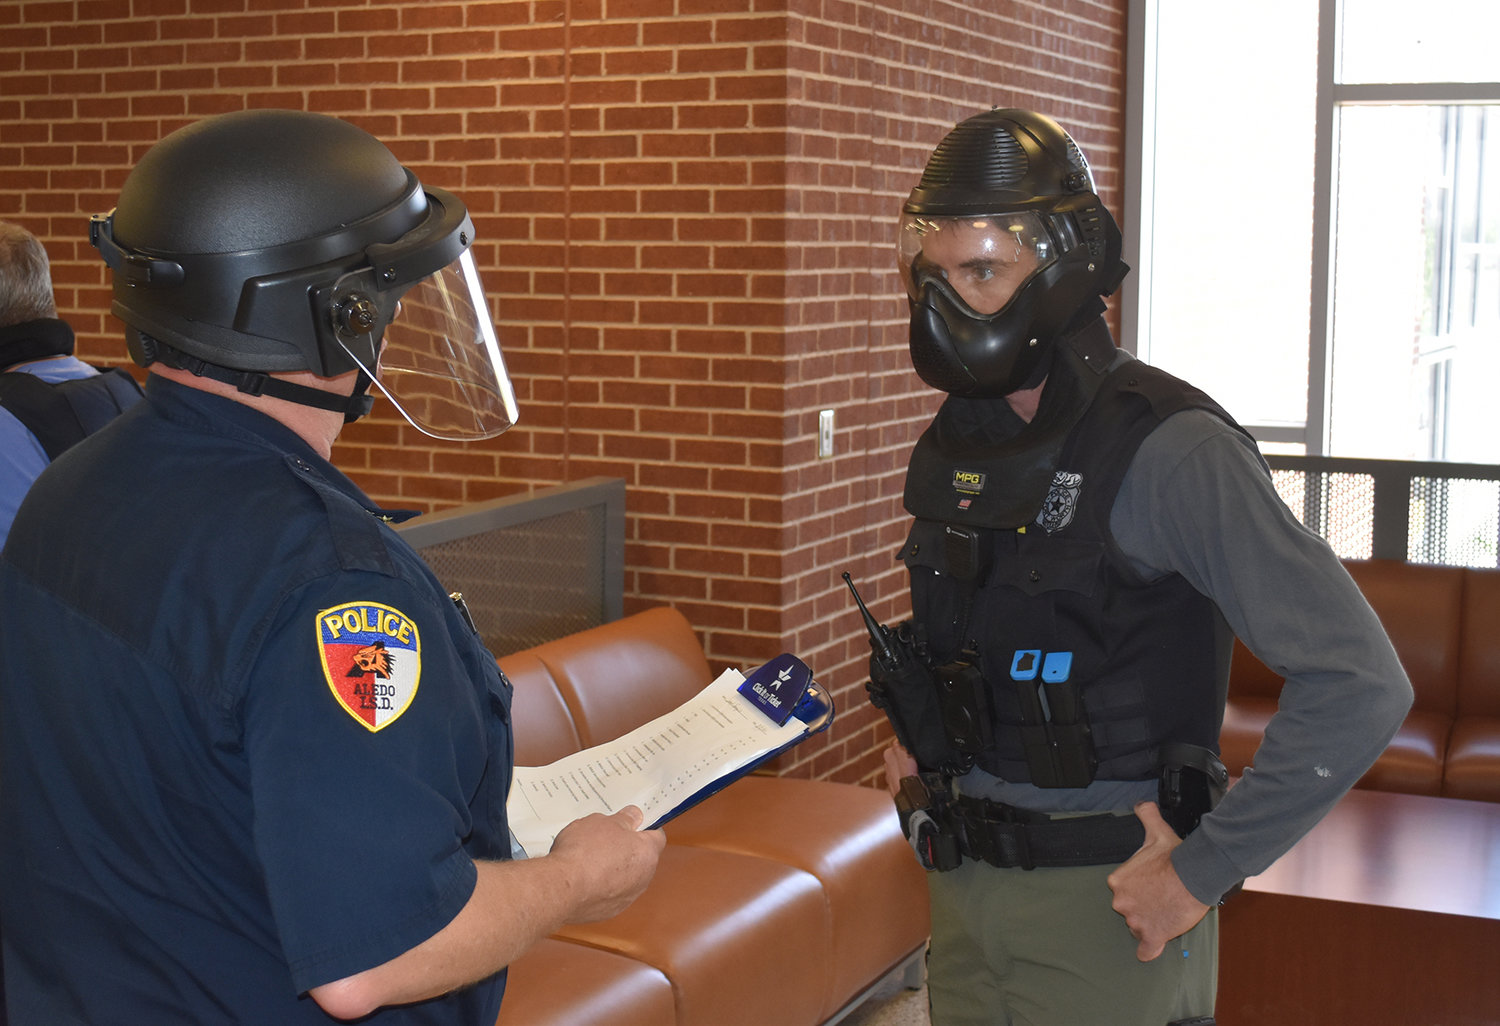 Aledo ISD Police Chief Fred Collie gives scenario training to Fort Worth Police Department Officer Juan Villagomez.